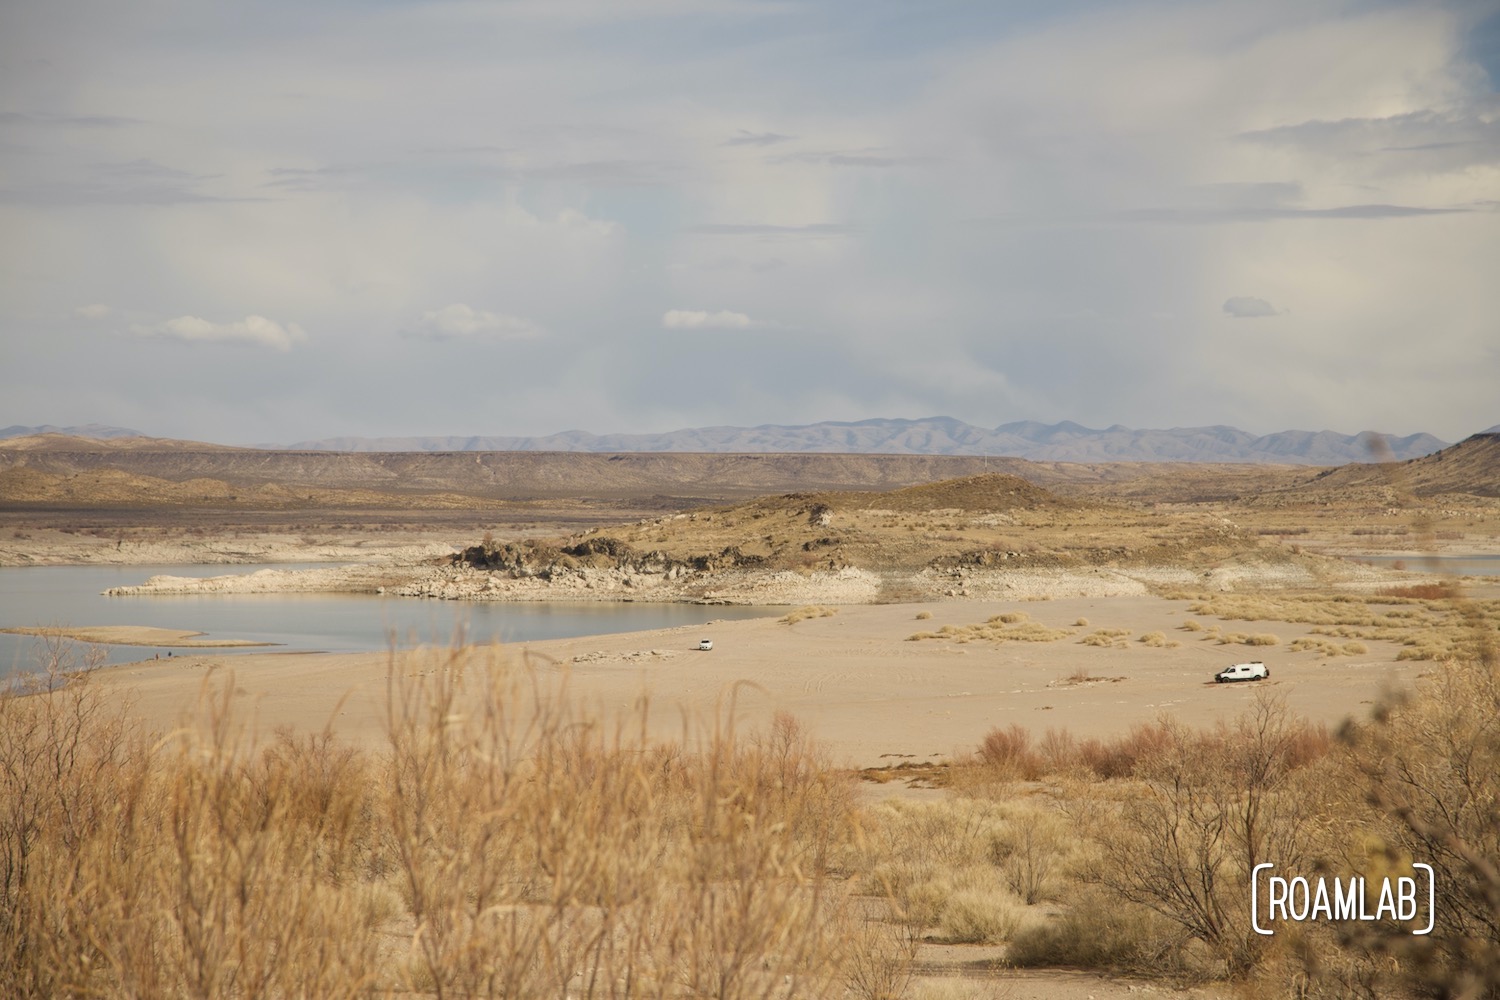 Distant view of Elephant Butte Lake with occasional vehicles parked along the shore.